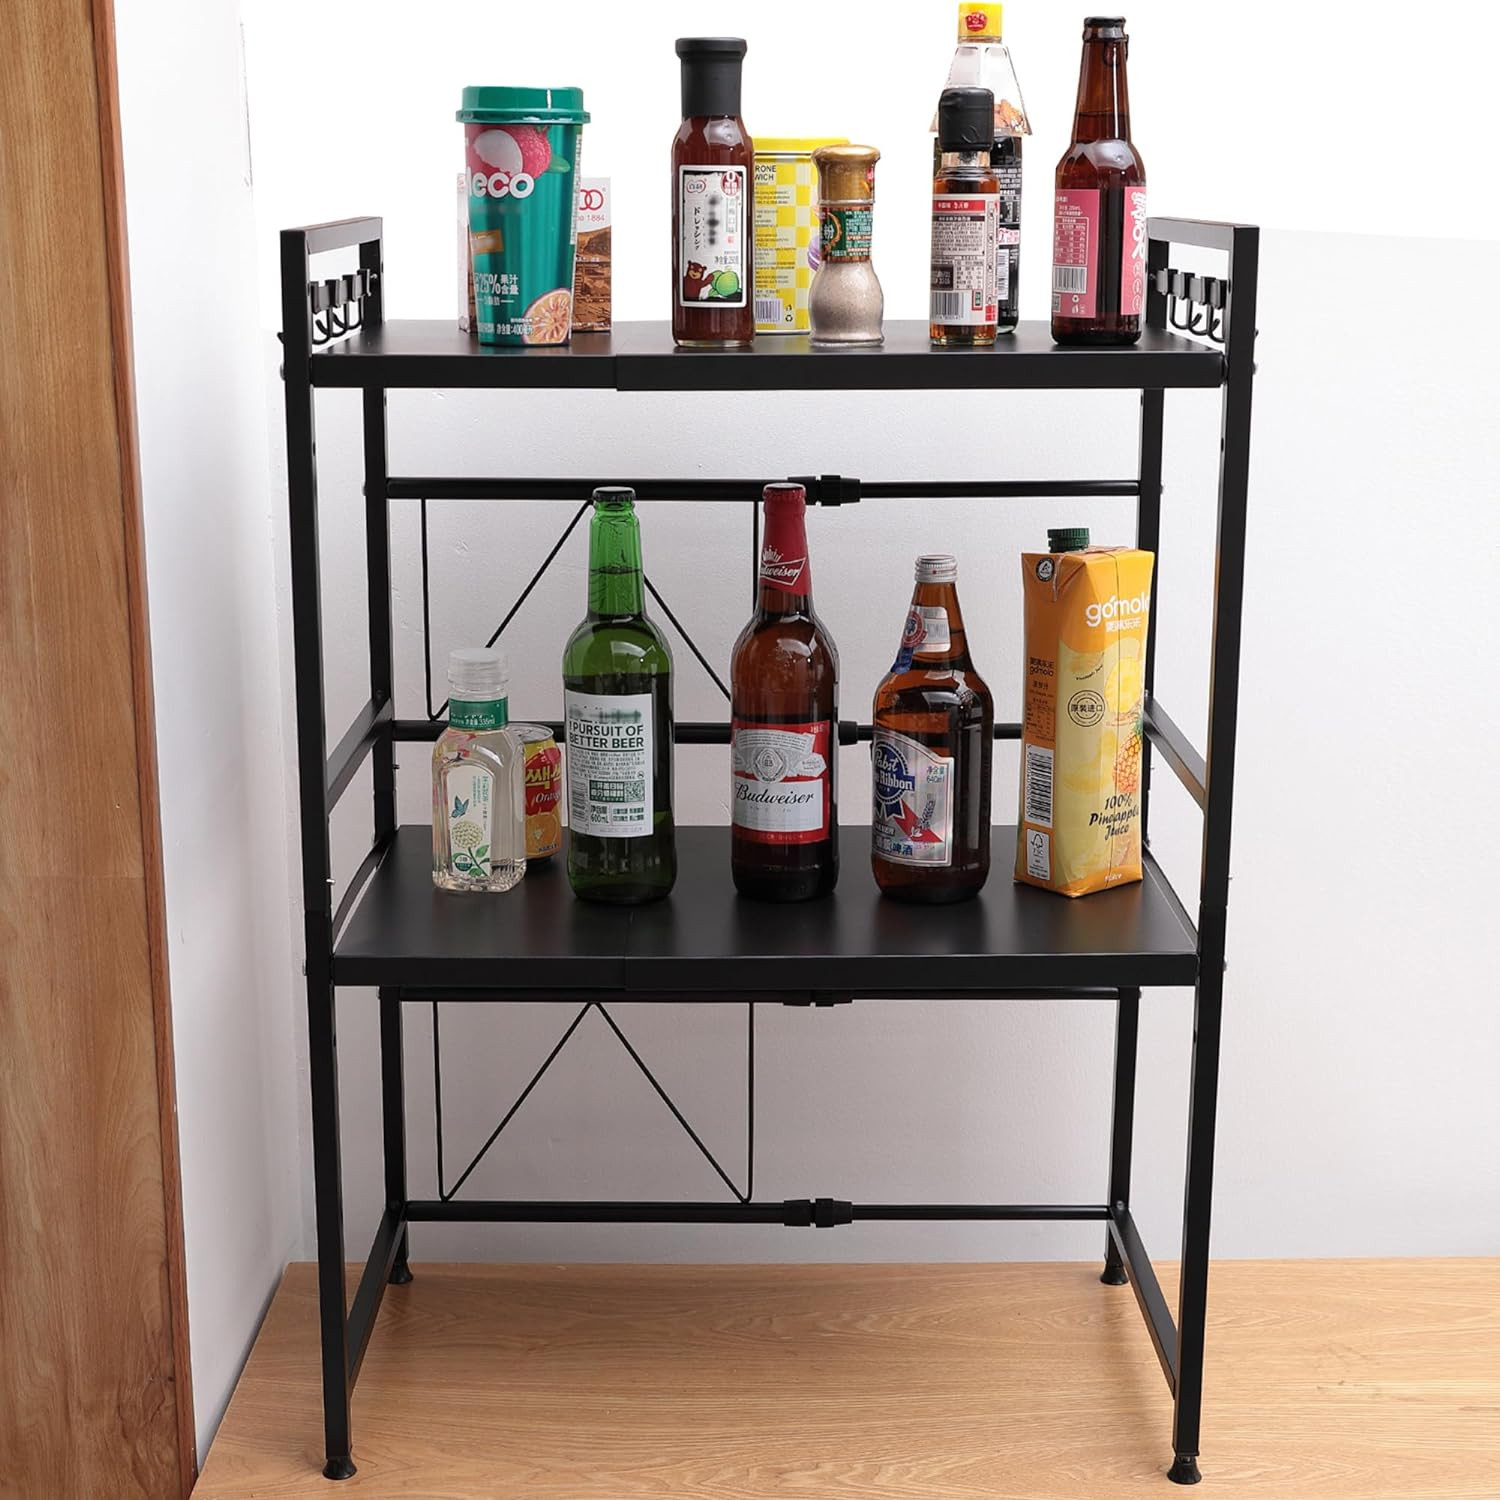 Kuber Industries 2-Layer Microwave Oven Rack|Telescopic Storage Rack|Microwave Shelf Stand with Hanging Hooks|Kitchen Counter Shelf Organizer (Black)